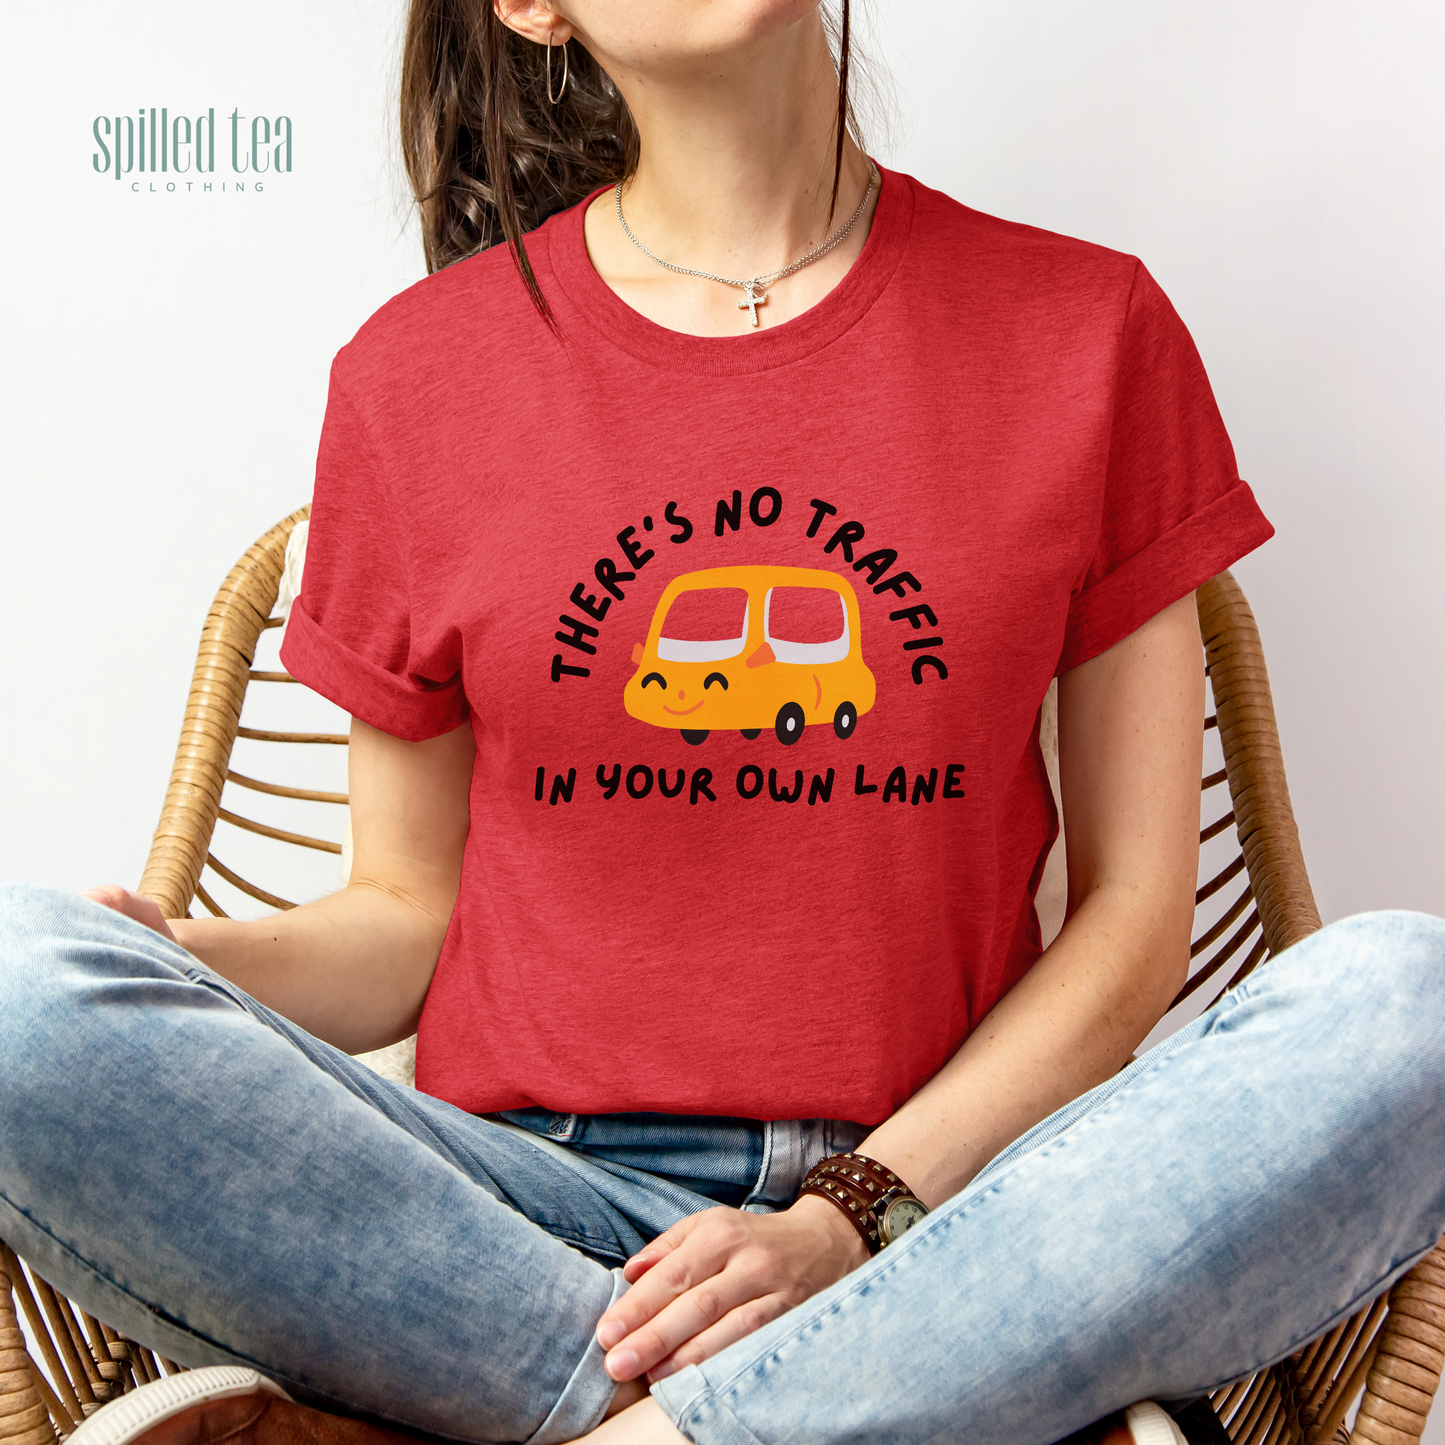 There Is No Traffic In Your Own Lane T-Shirt